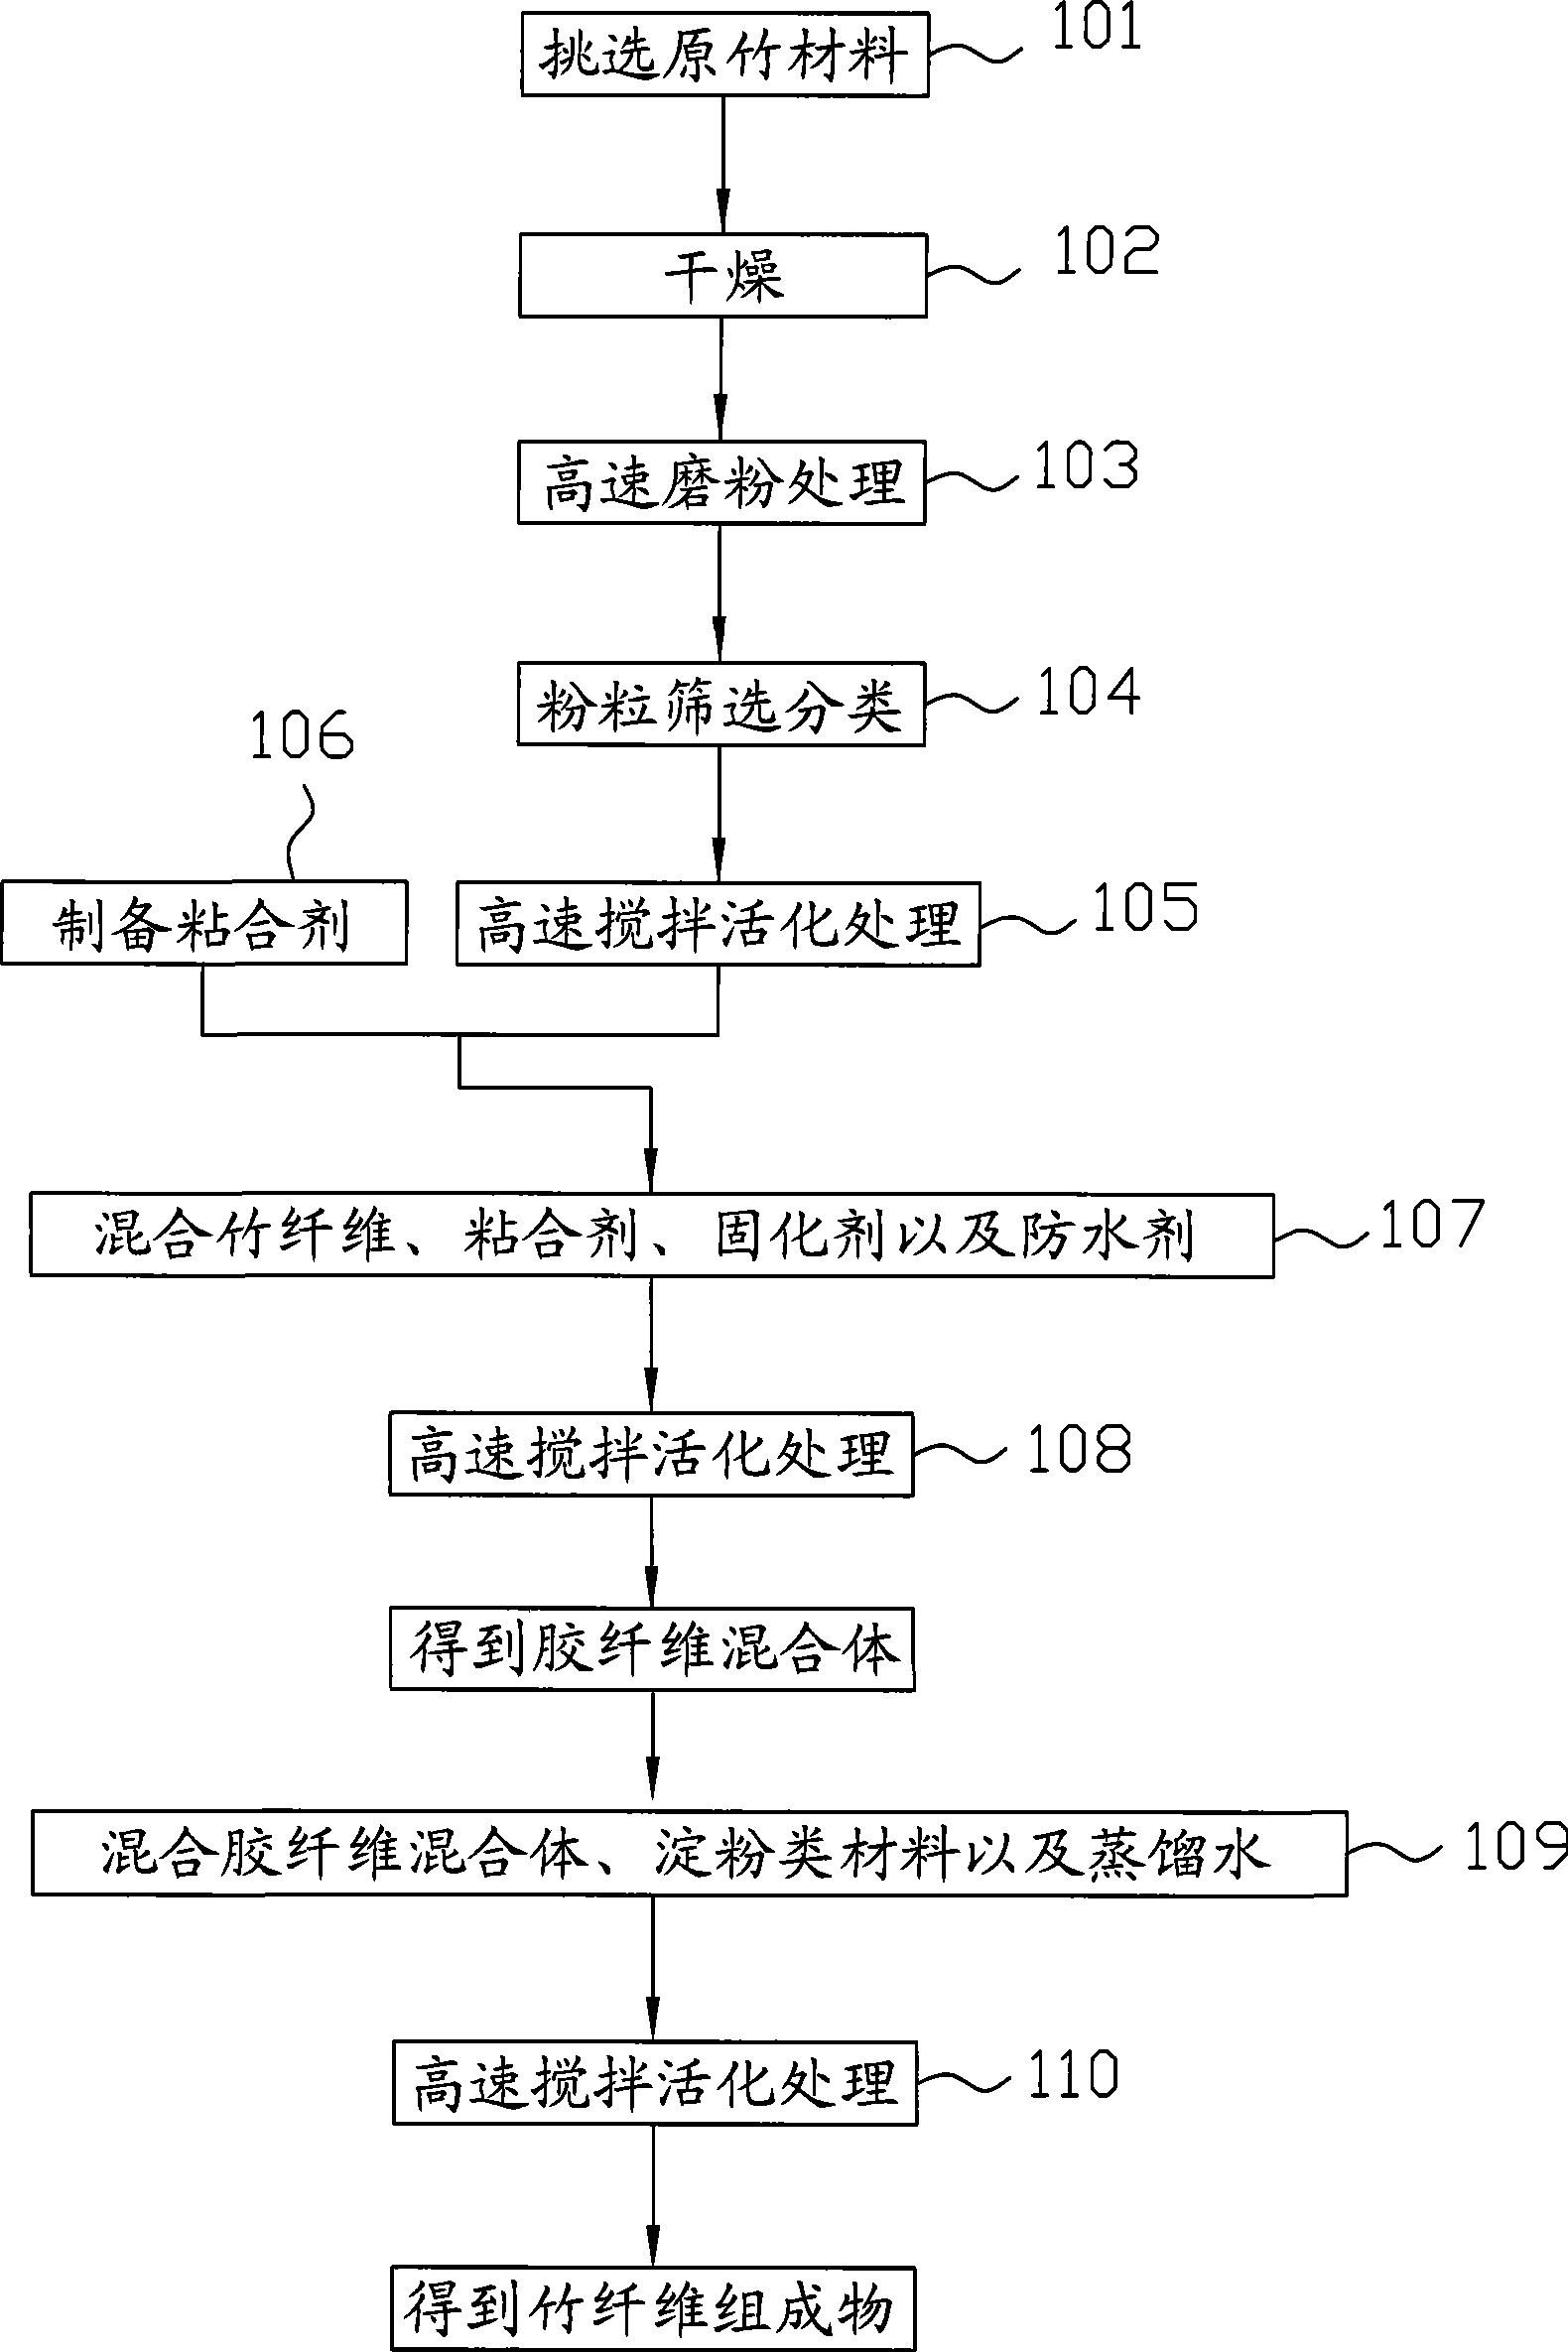 Bamboo fibre composition and method for producing the same